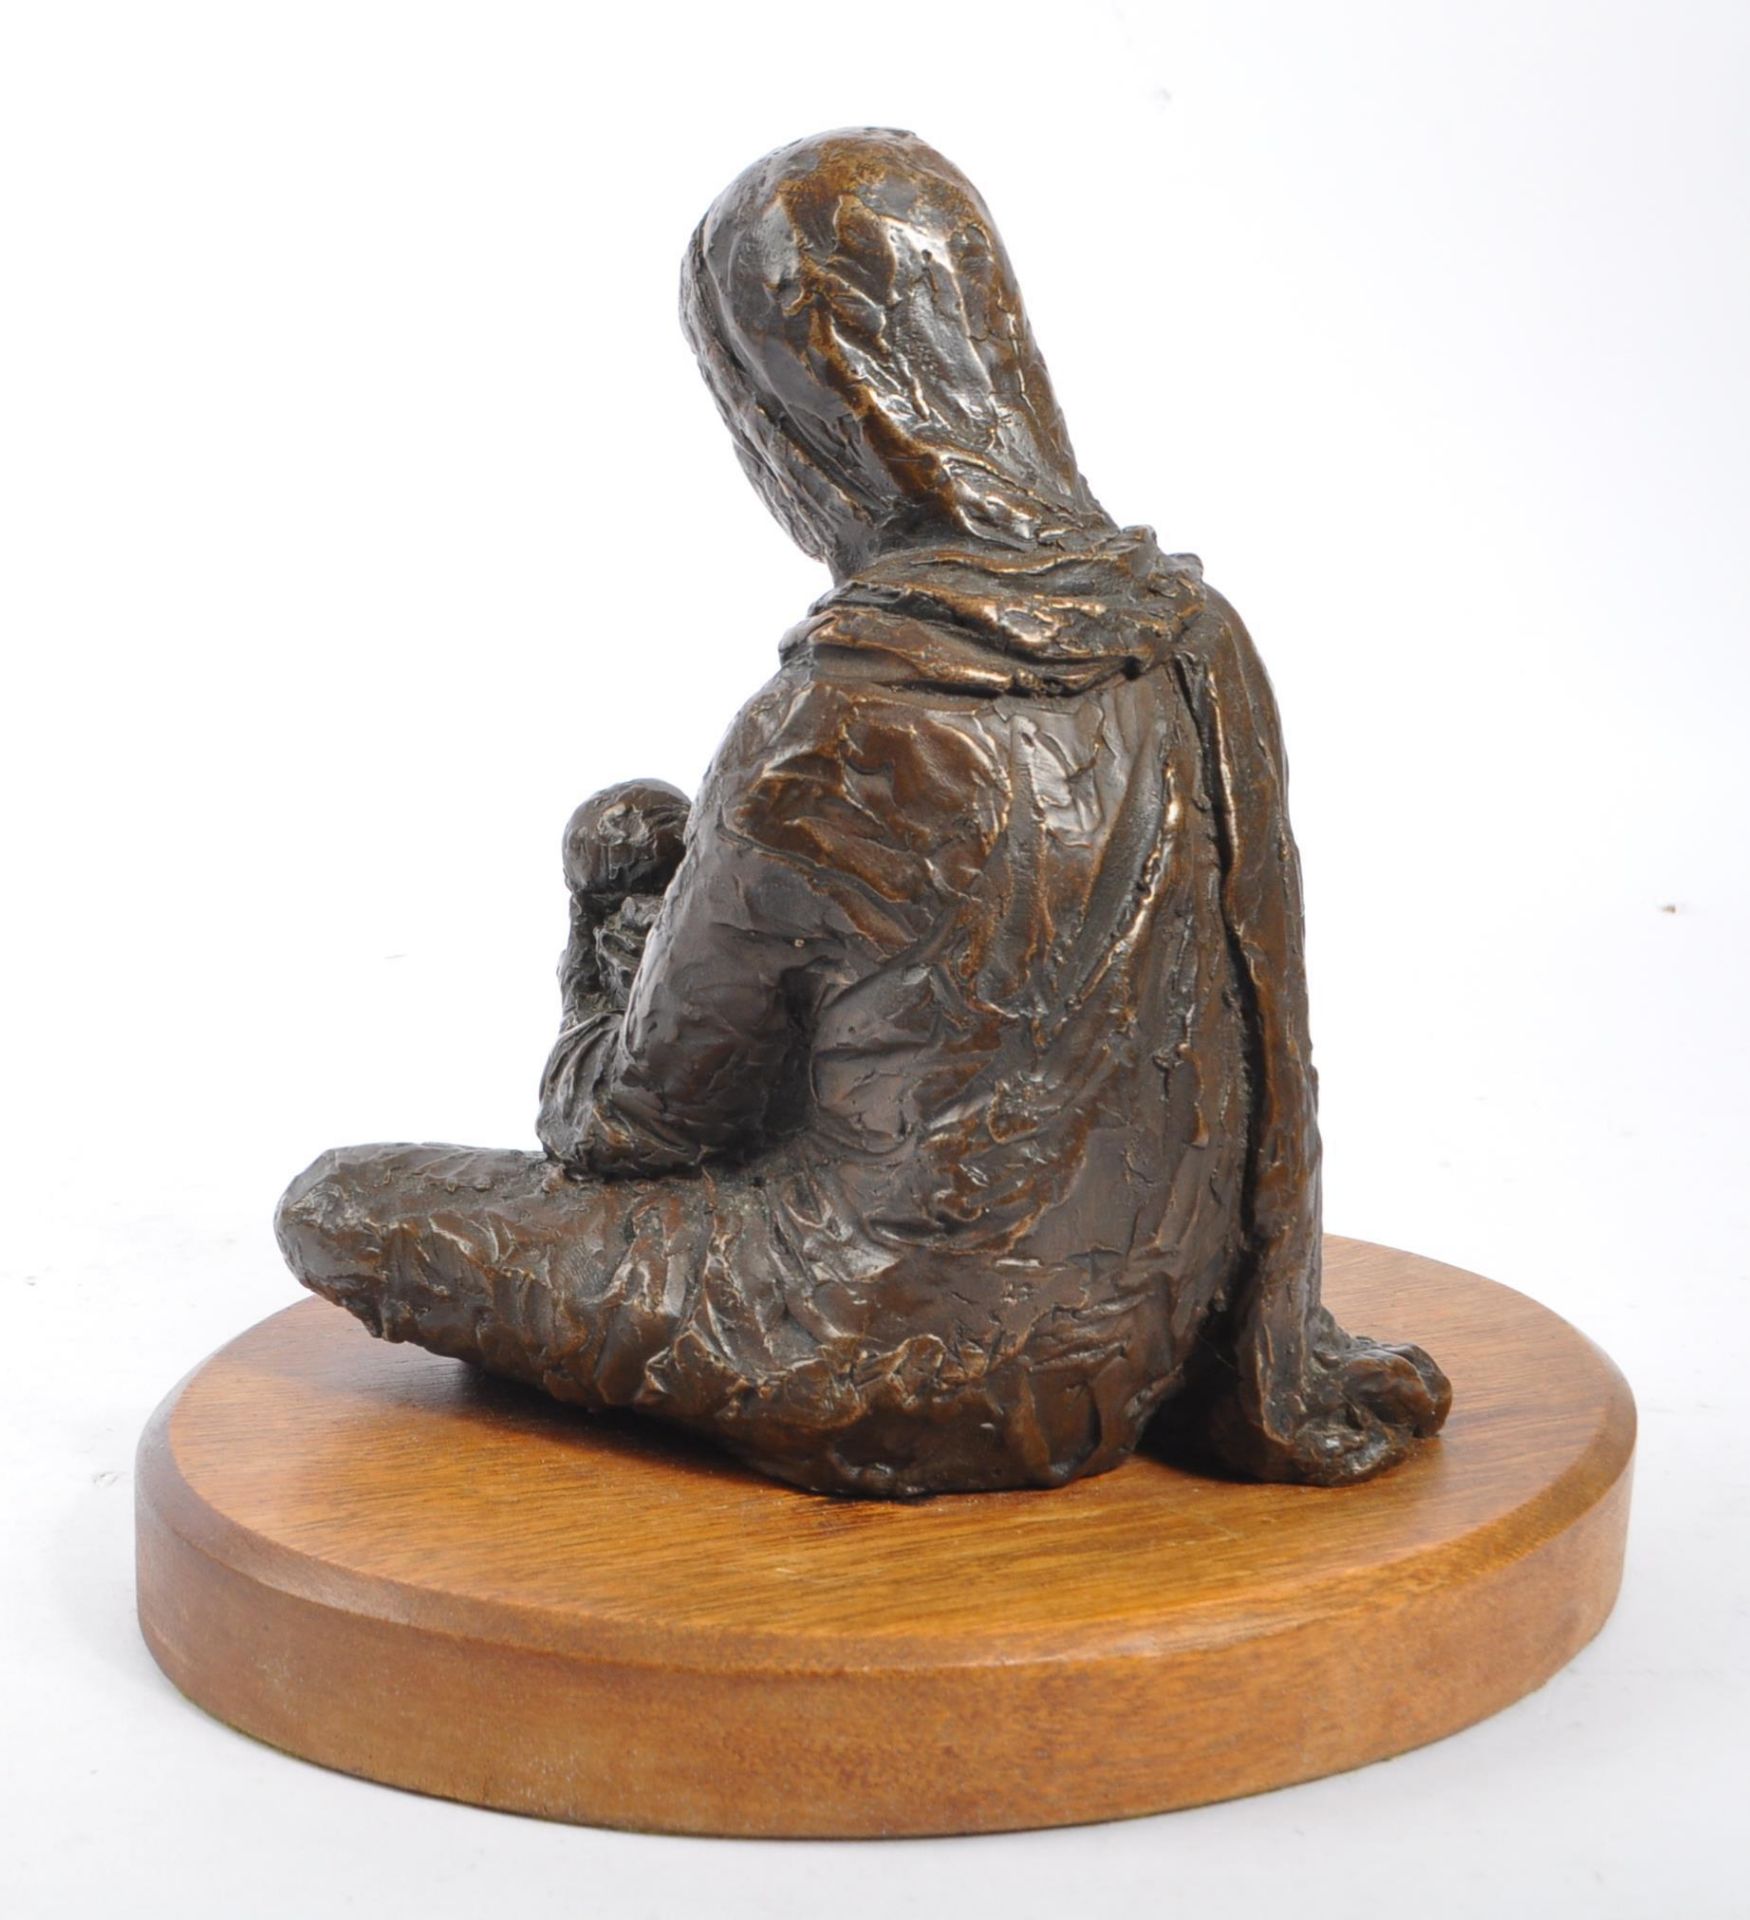 VINTAGE 20TH CENTURY SPELTER FIGURE OF WOMAN HOLDING BABY - Image 2 of 6